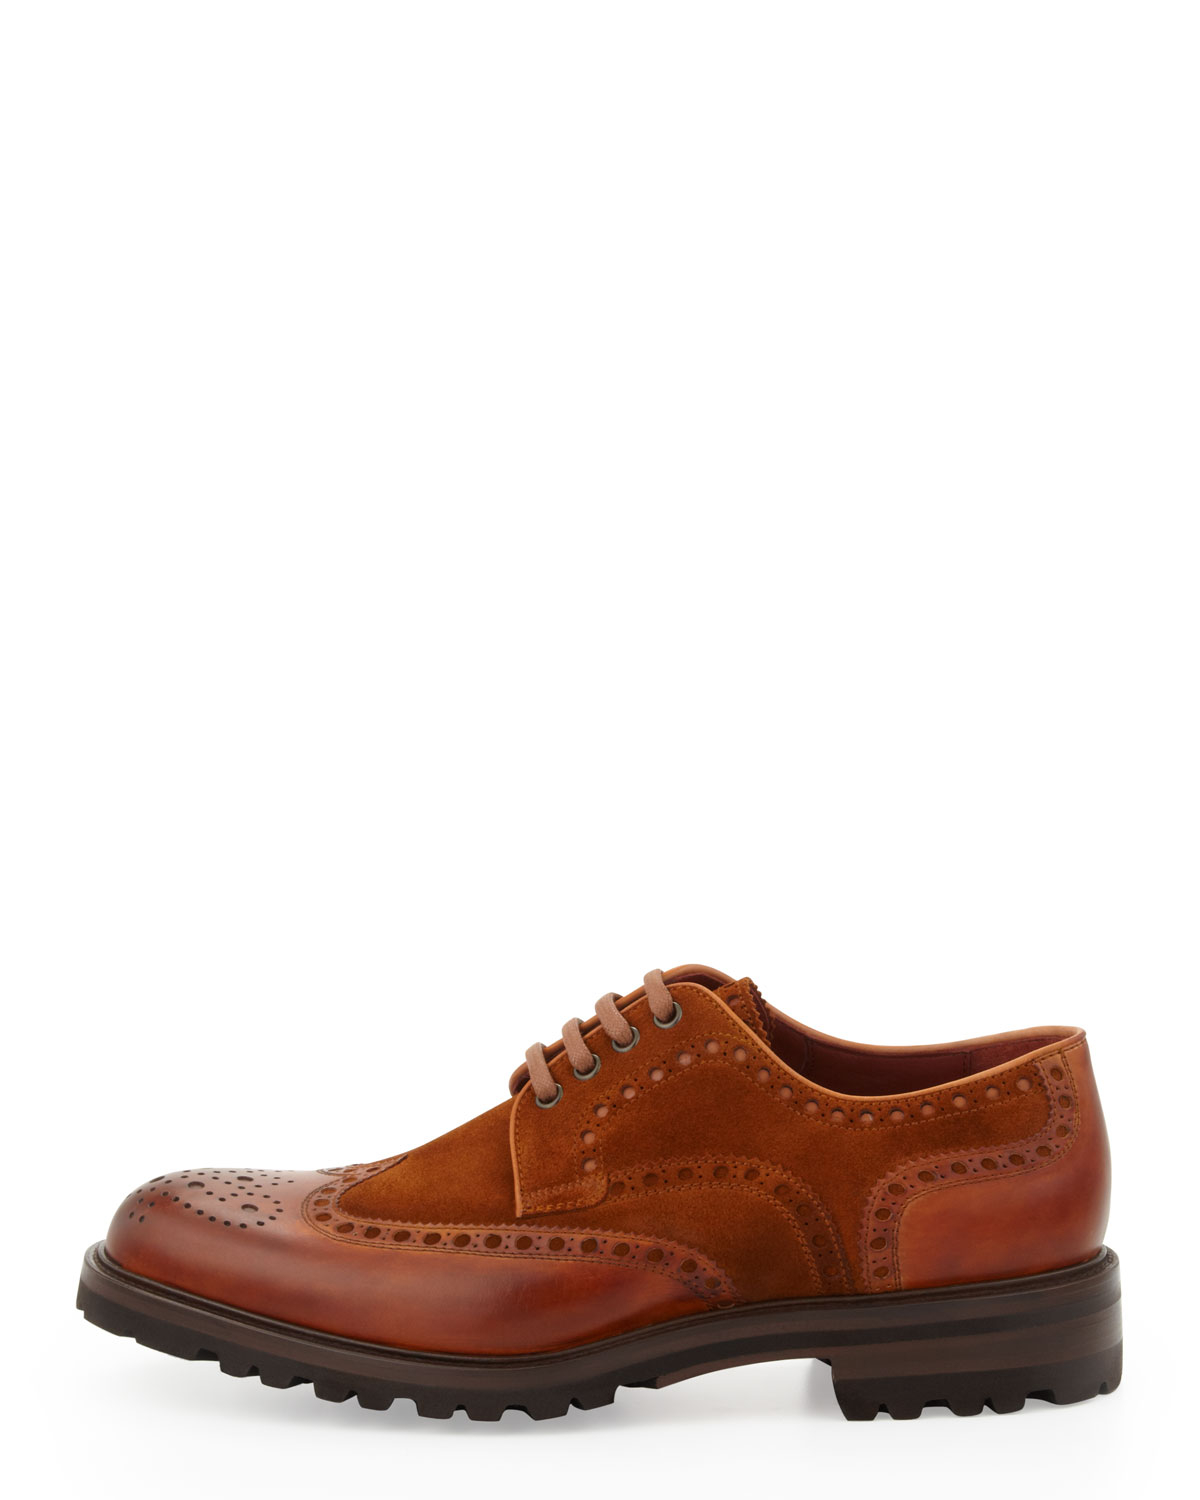 Bergdorf Goodman Hand-Antiqued Suede/Leather Lug-Sole Lace-Up in Brown ...